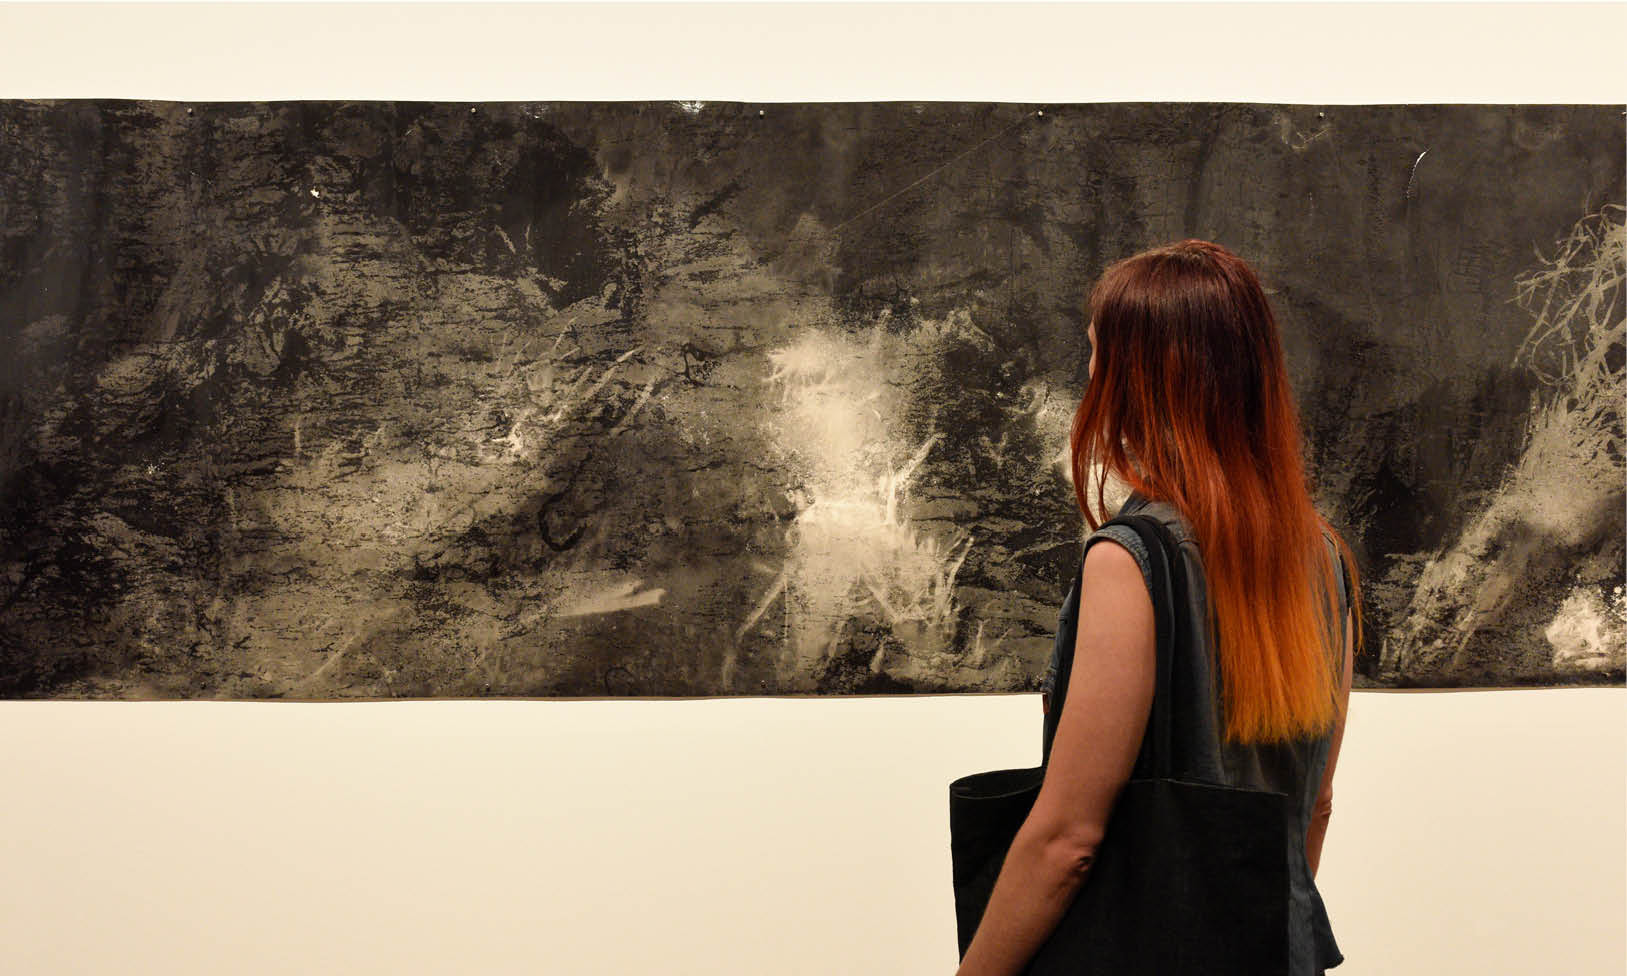 A black and white artwork a gallery. A person with orange hair is looking away from the camera towards the painting.